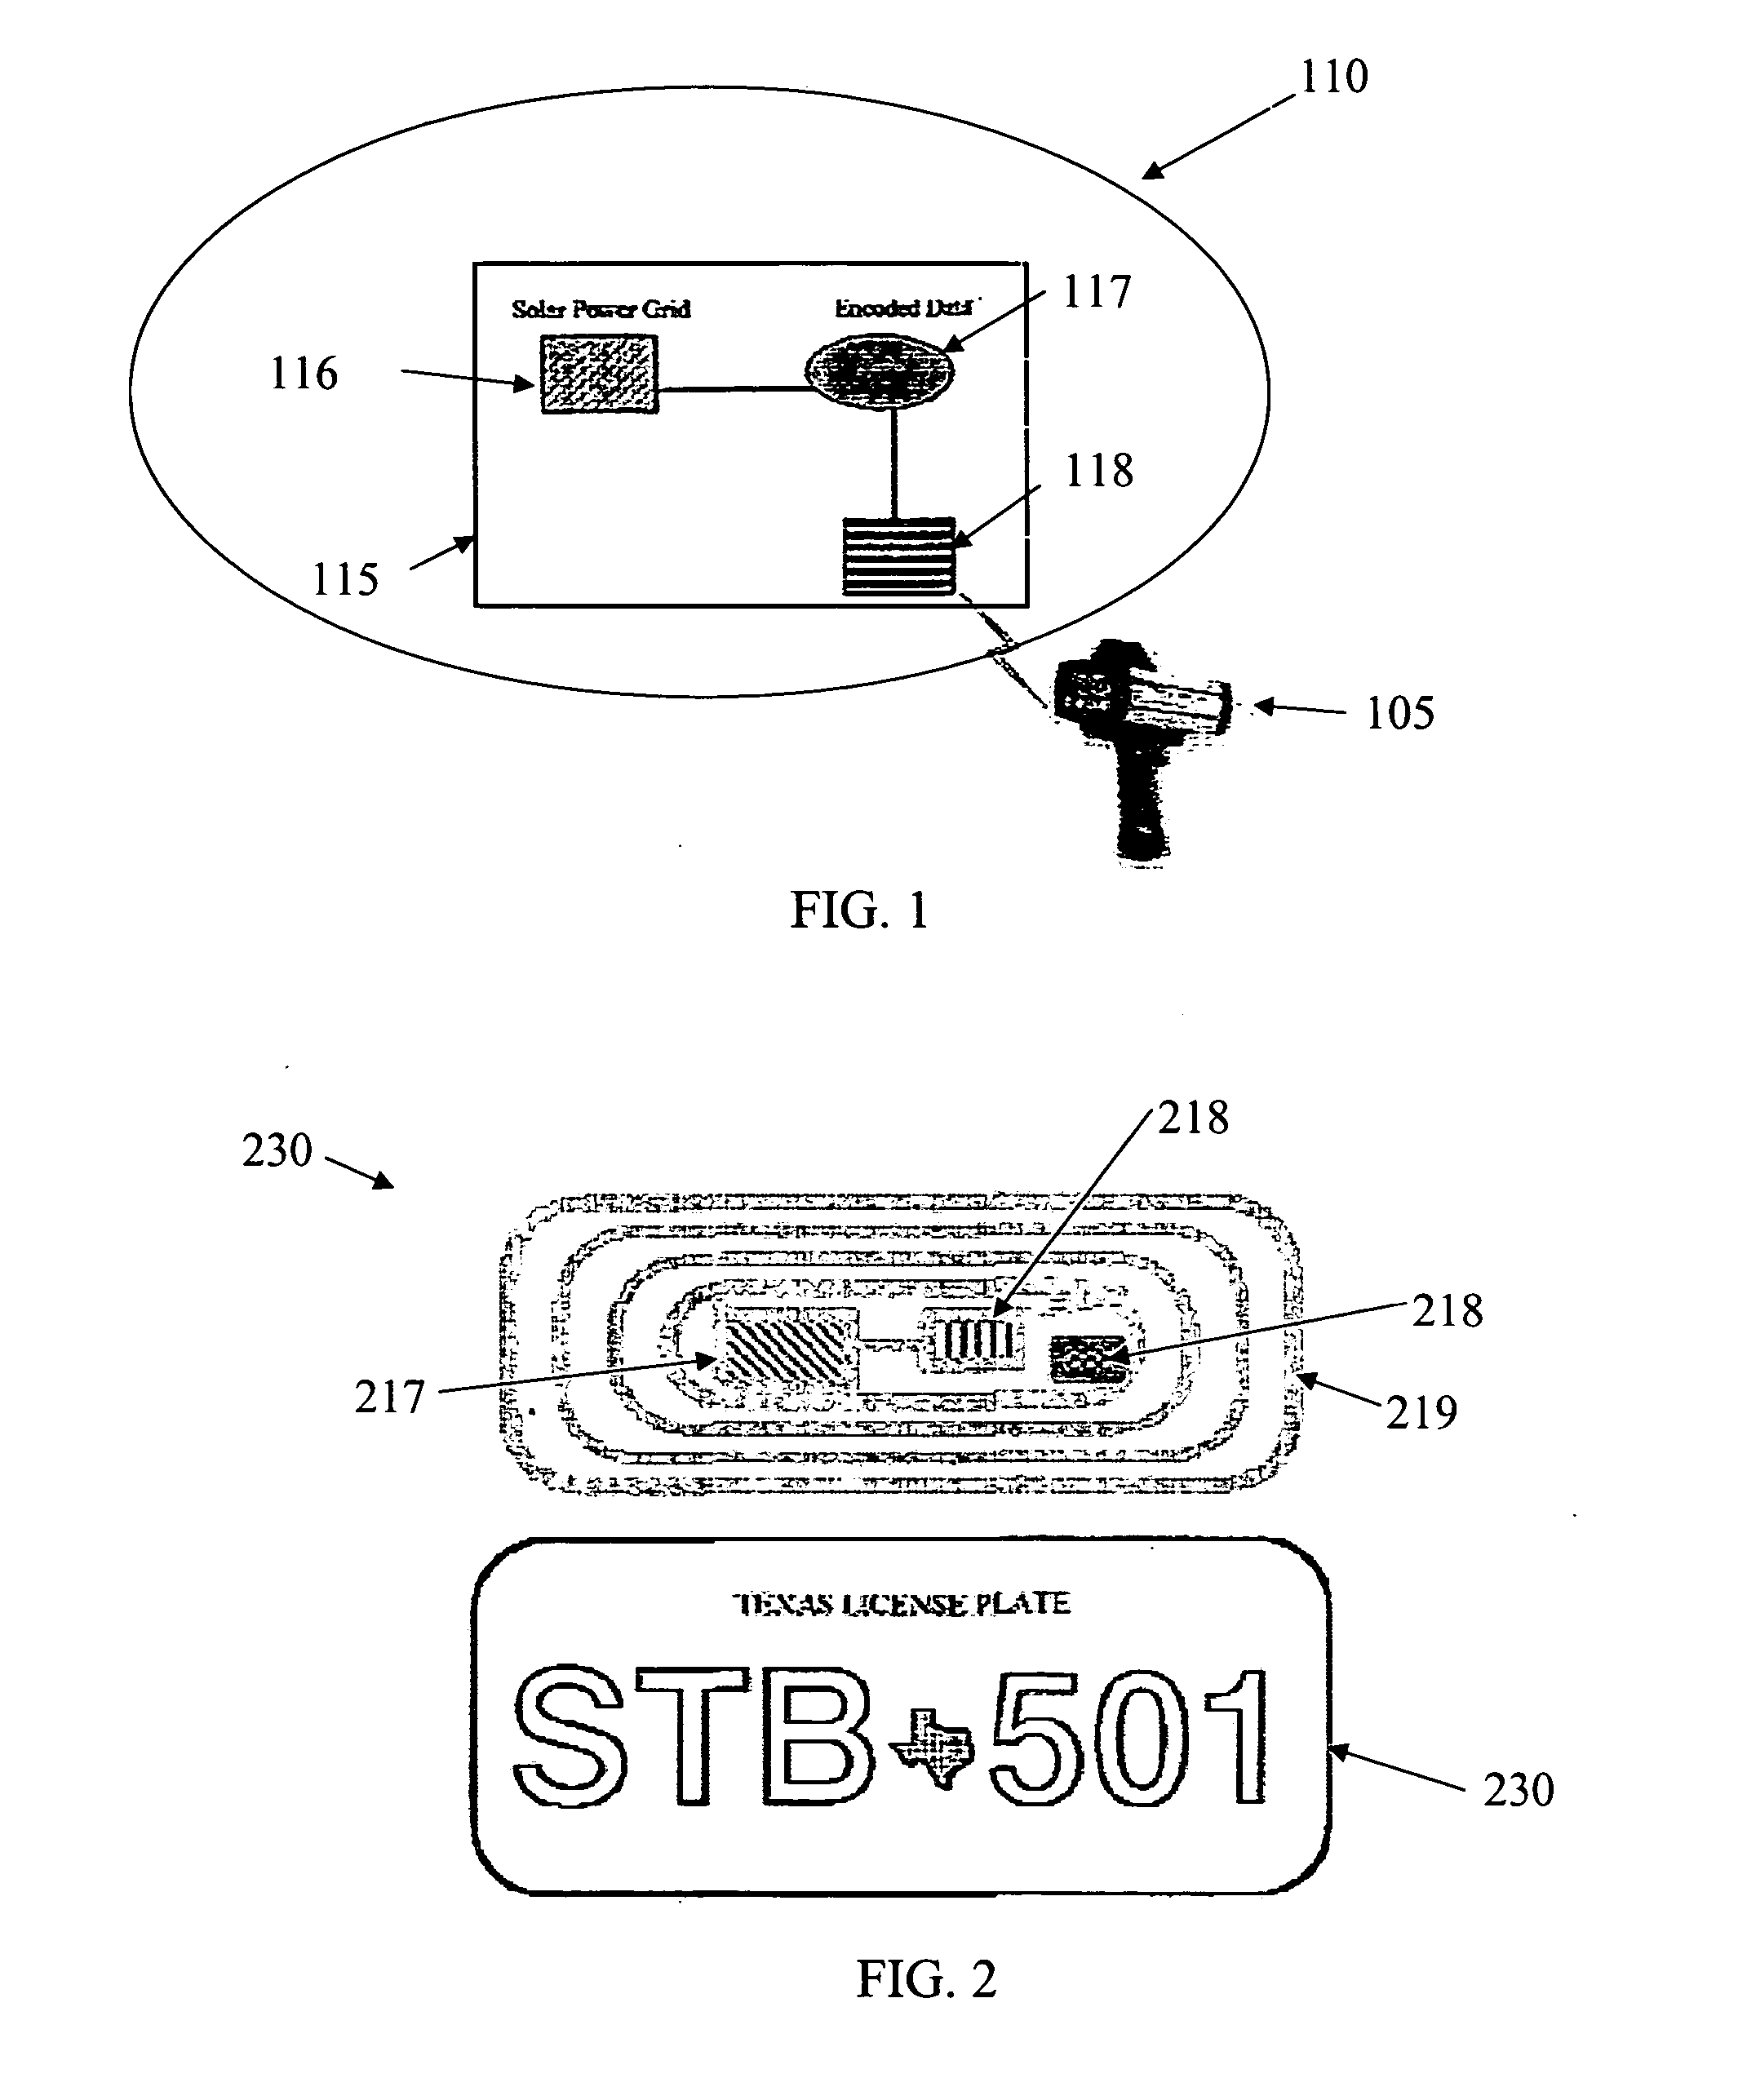 Systems and methods for wirelessly determining vehicle identification, registration, compliance status and location